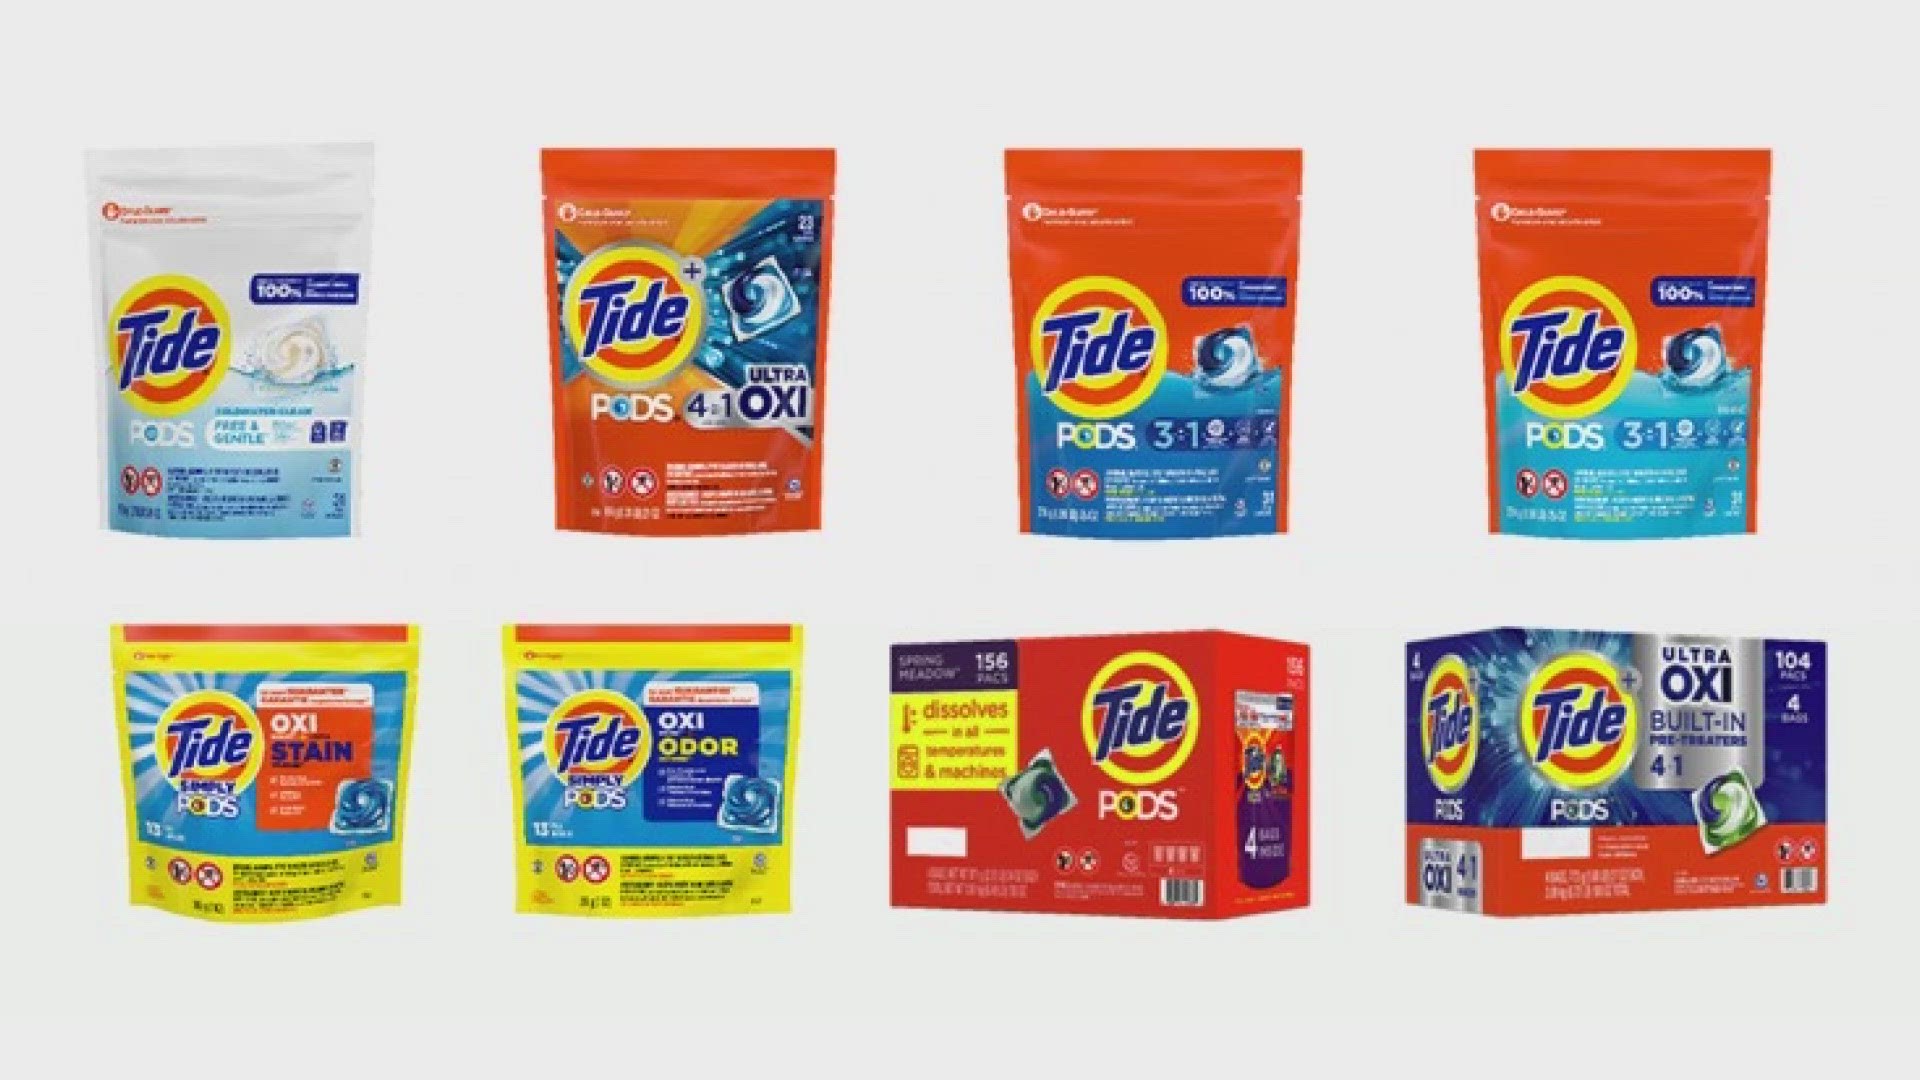 Procter & Gamble is recalling 8.2 million bags of laundry detergent pods under various brand names because the packaging of the bag is defective and can split open.